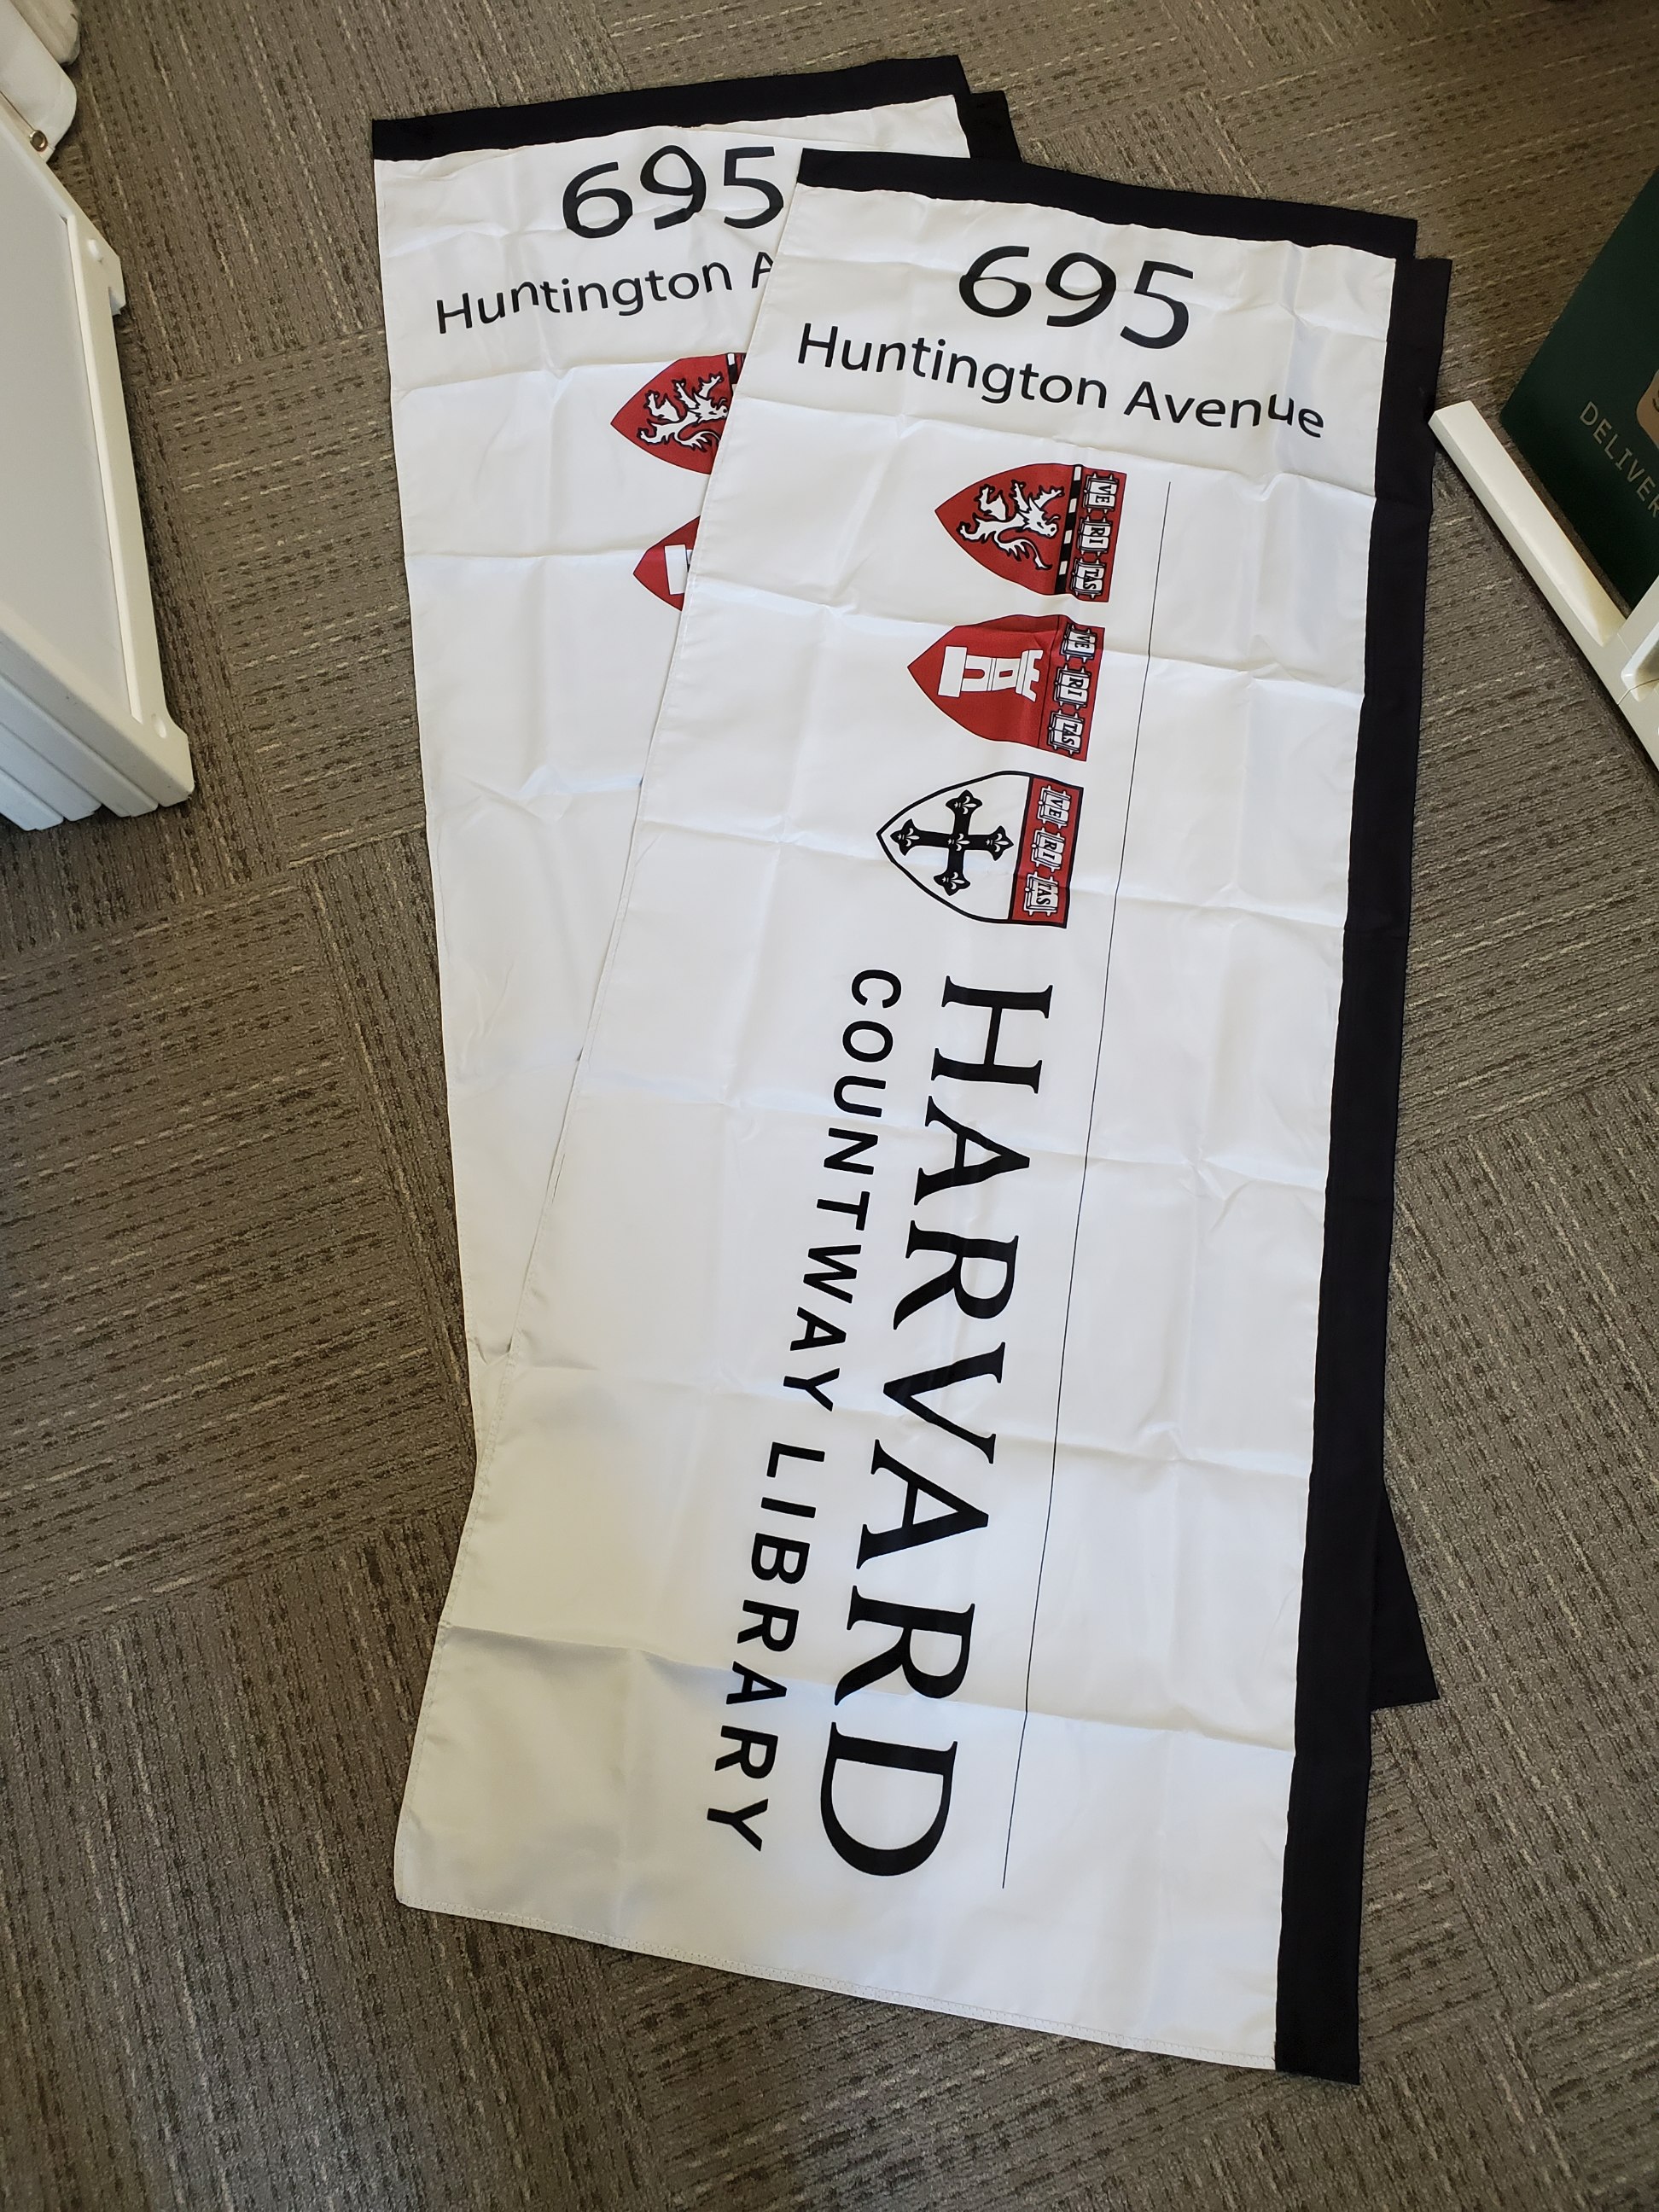 white flags with the Harvard Countway Library logo and building address (695 Huntington Avenue)